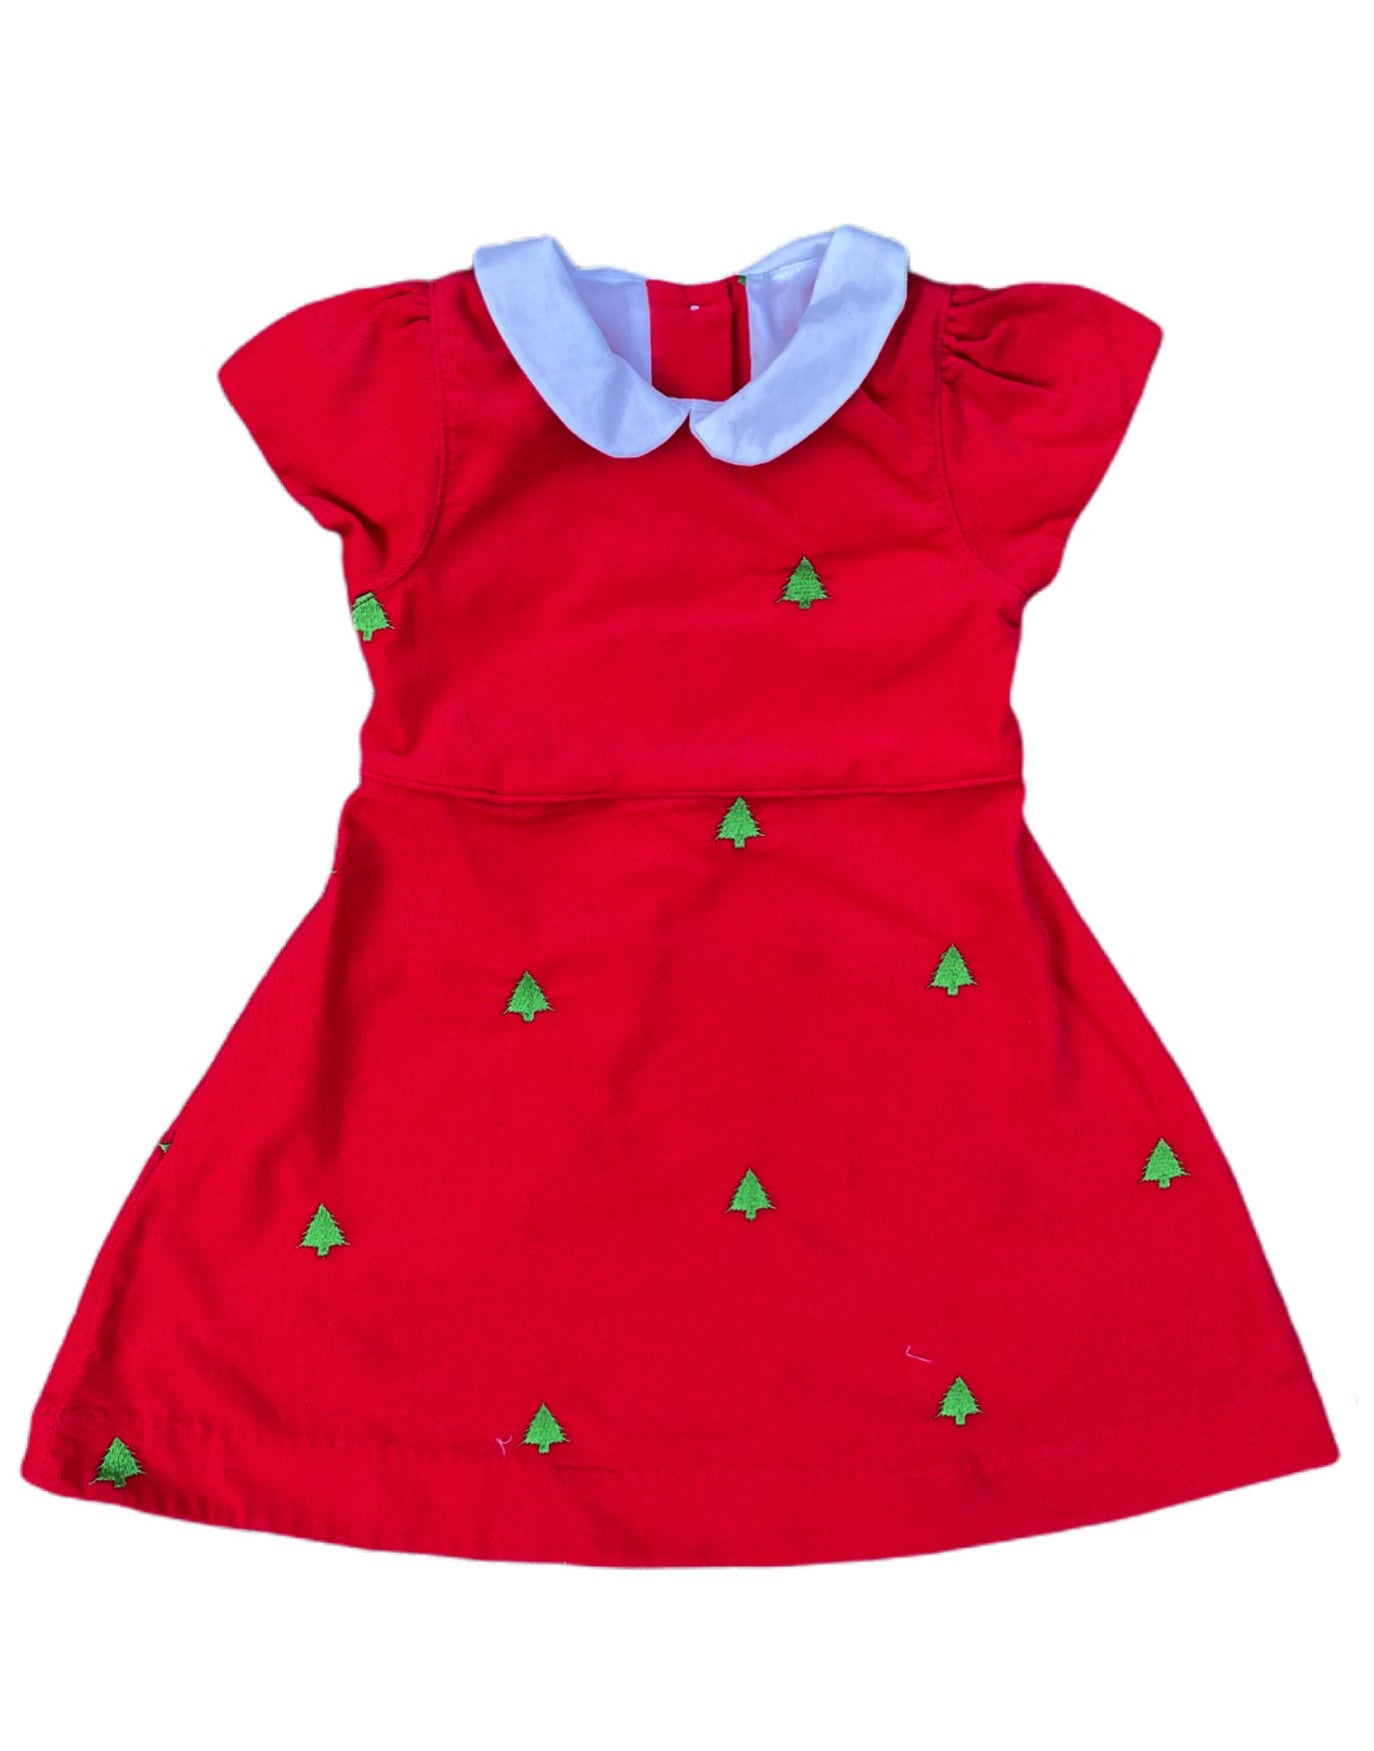 Red Corduroy with Green Embroidered Christmas Trees Peter Pan Collar Dress